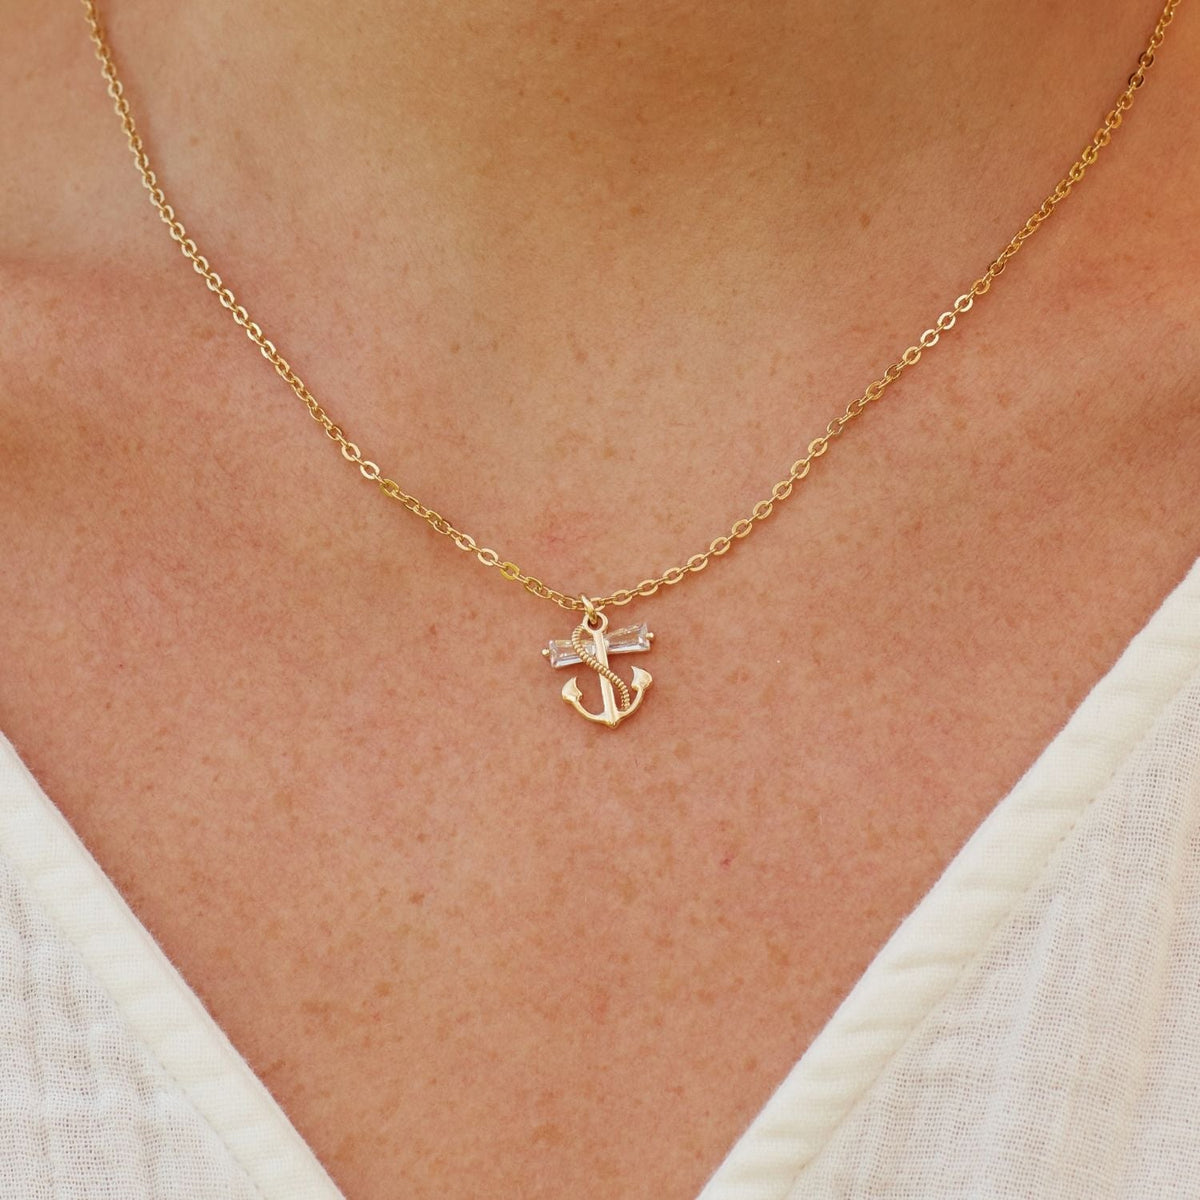 To My Boyfriend&#39;s Mom | His Heart is Safe With Me | Anchor Necklace